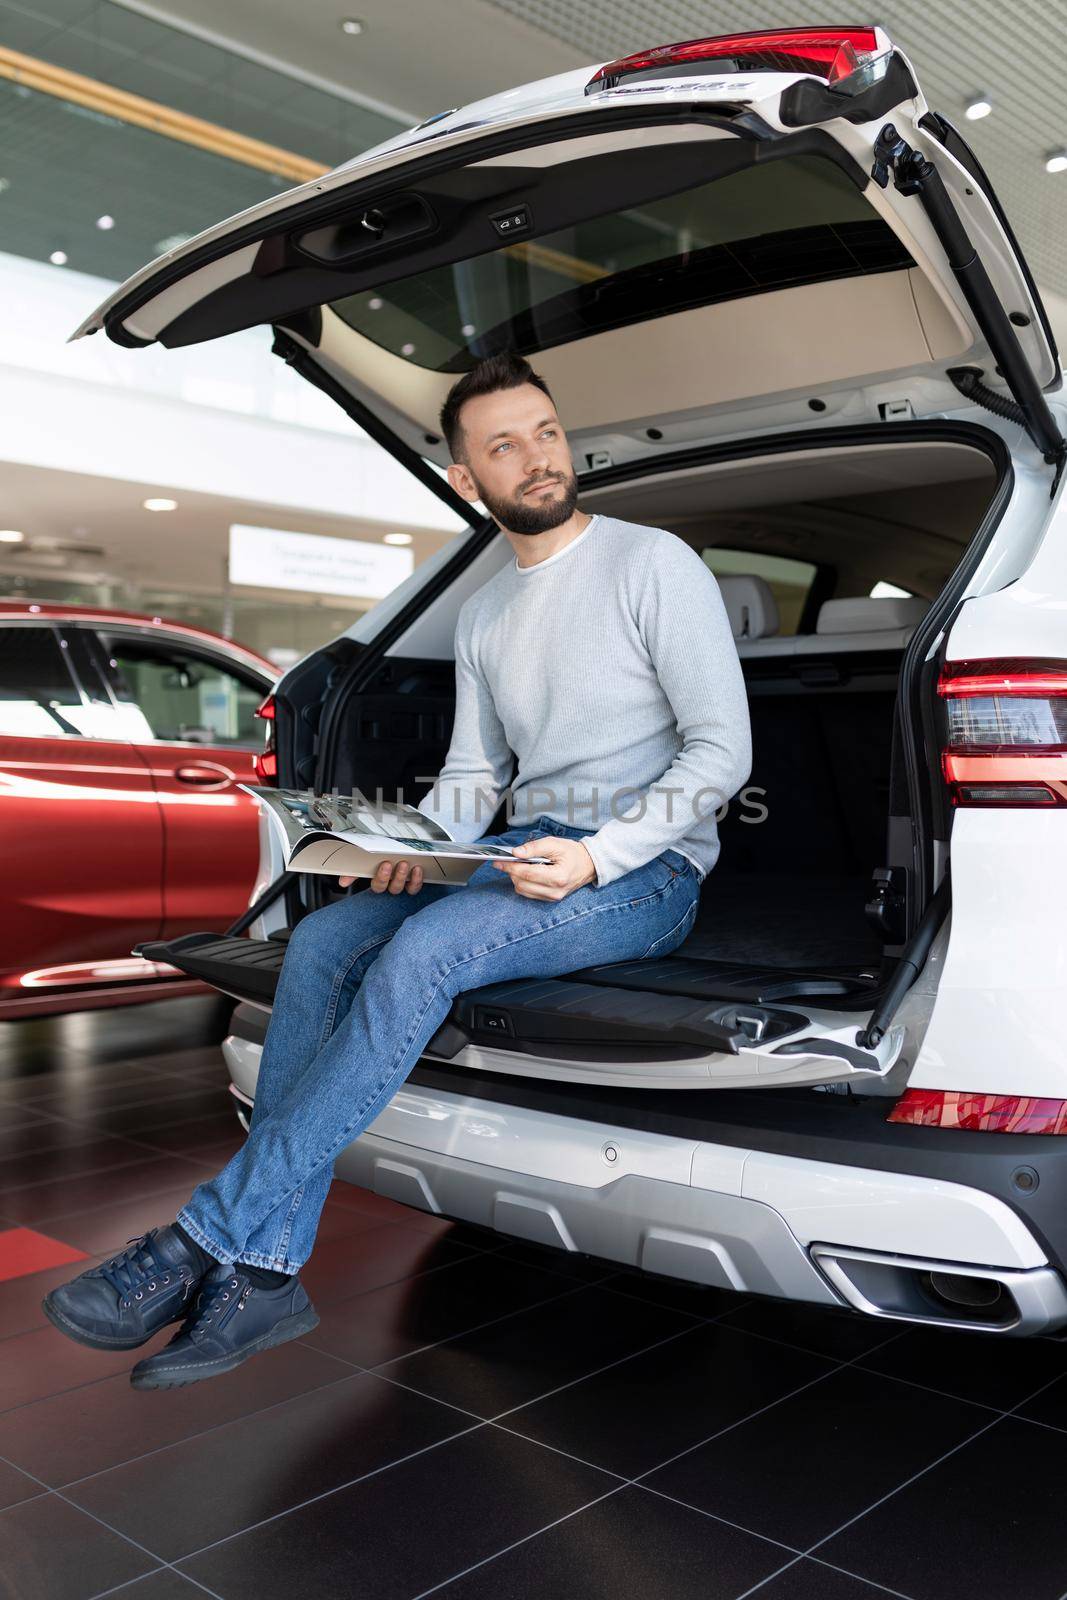 A man sits in the trunk of an SUV and dreams of buying it.